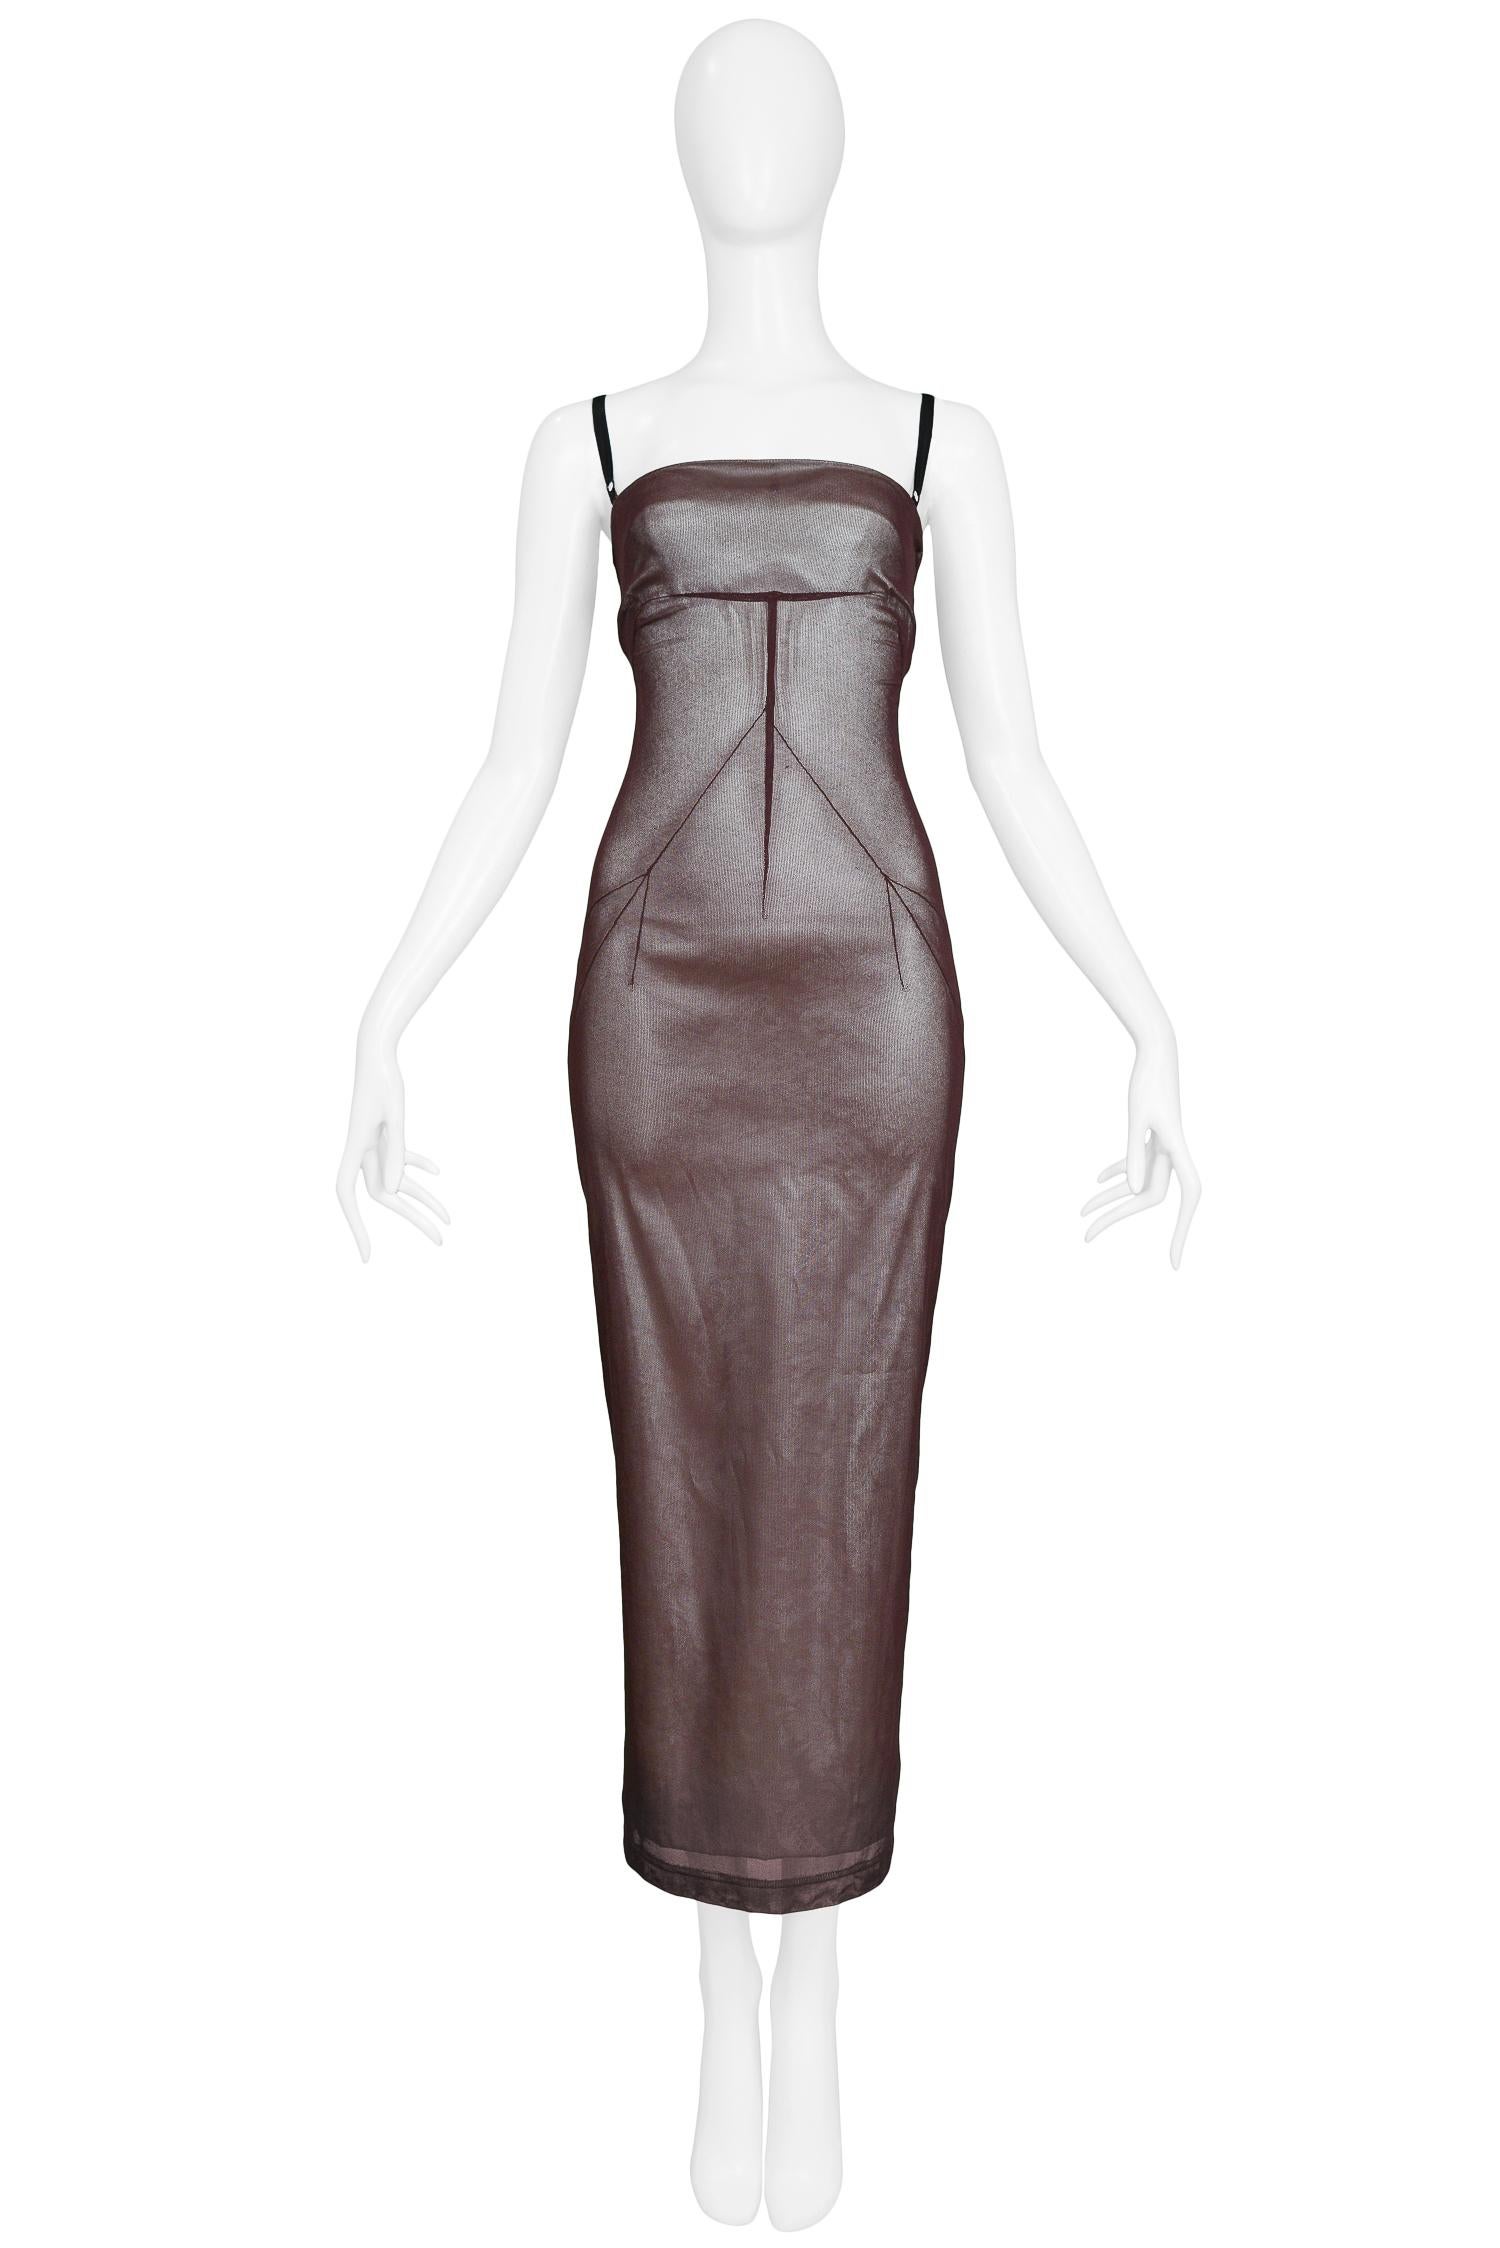 Vintage Dolce & Gabbana plum-colored mesh bustier dress with pencil skirt. The dress features spaghetti straps, darting at top and hook & eye closure at back. 1998 Collection. 

Excellent Condition.

Size: 40
